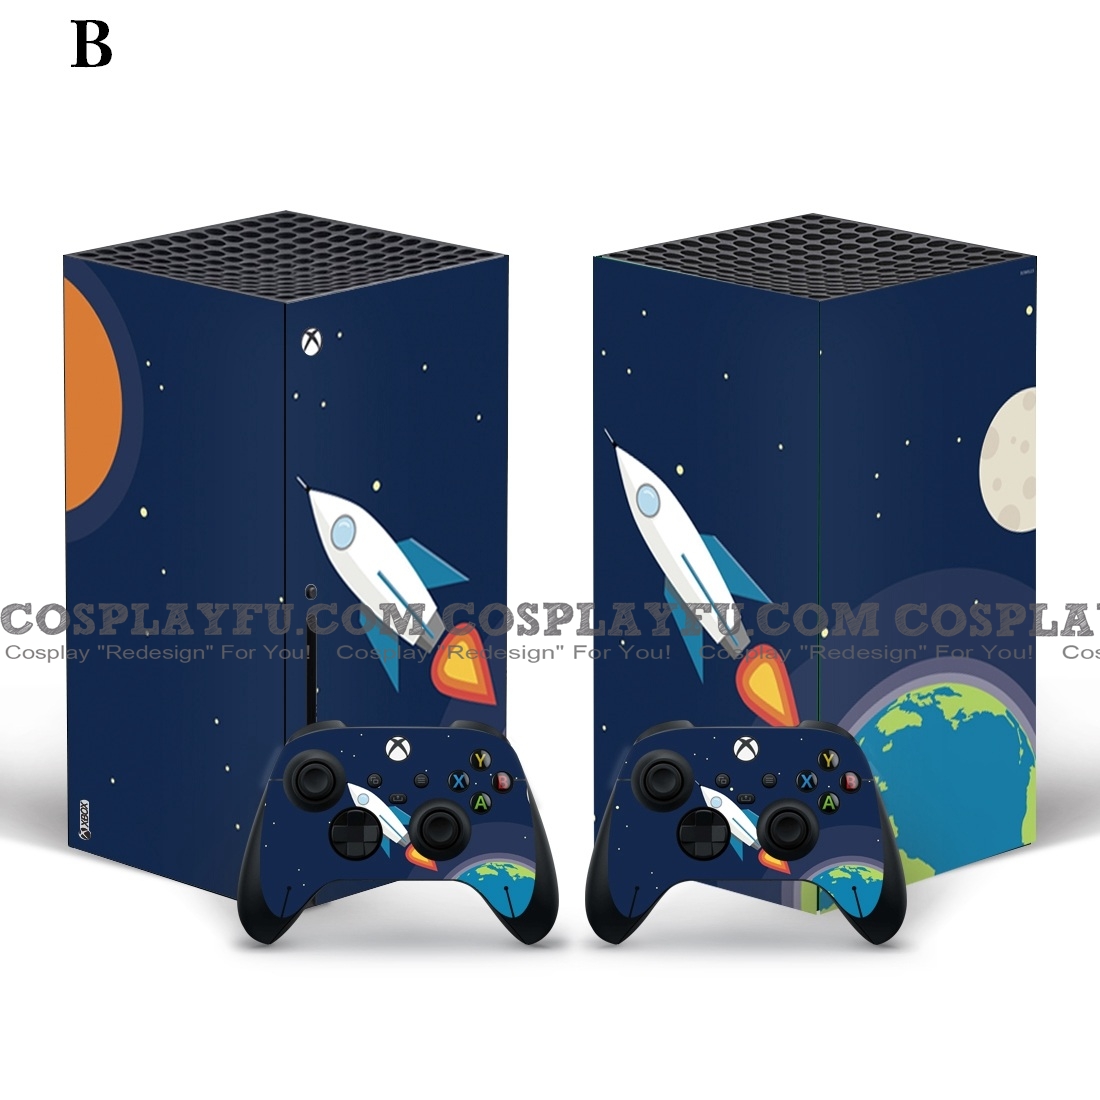 Space Skin Decal For Xbox Series X Console And Controller, Full Wrap Vinyl